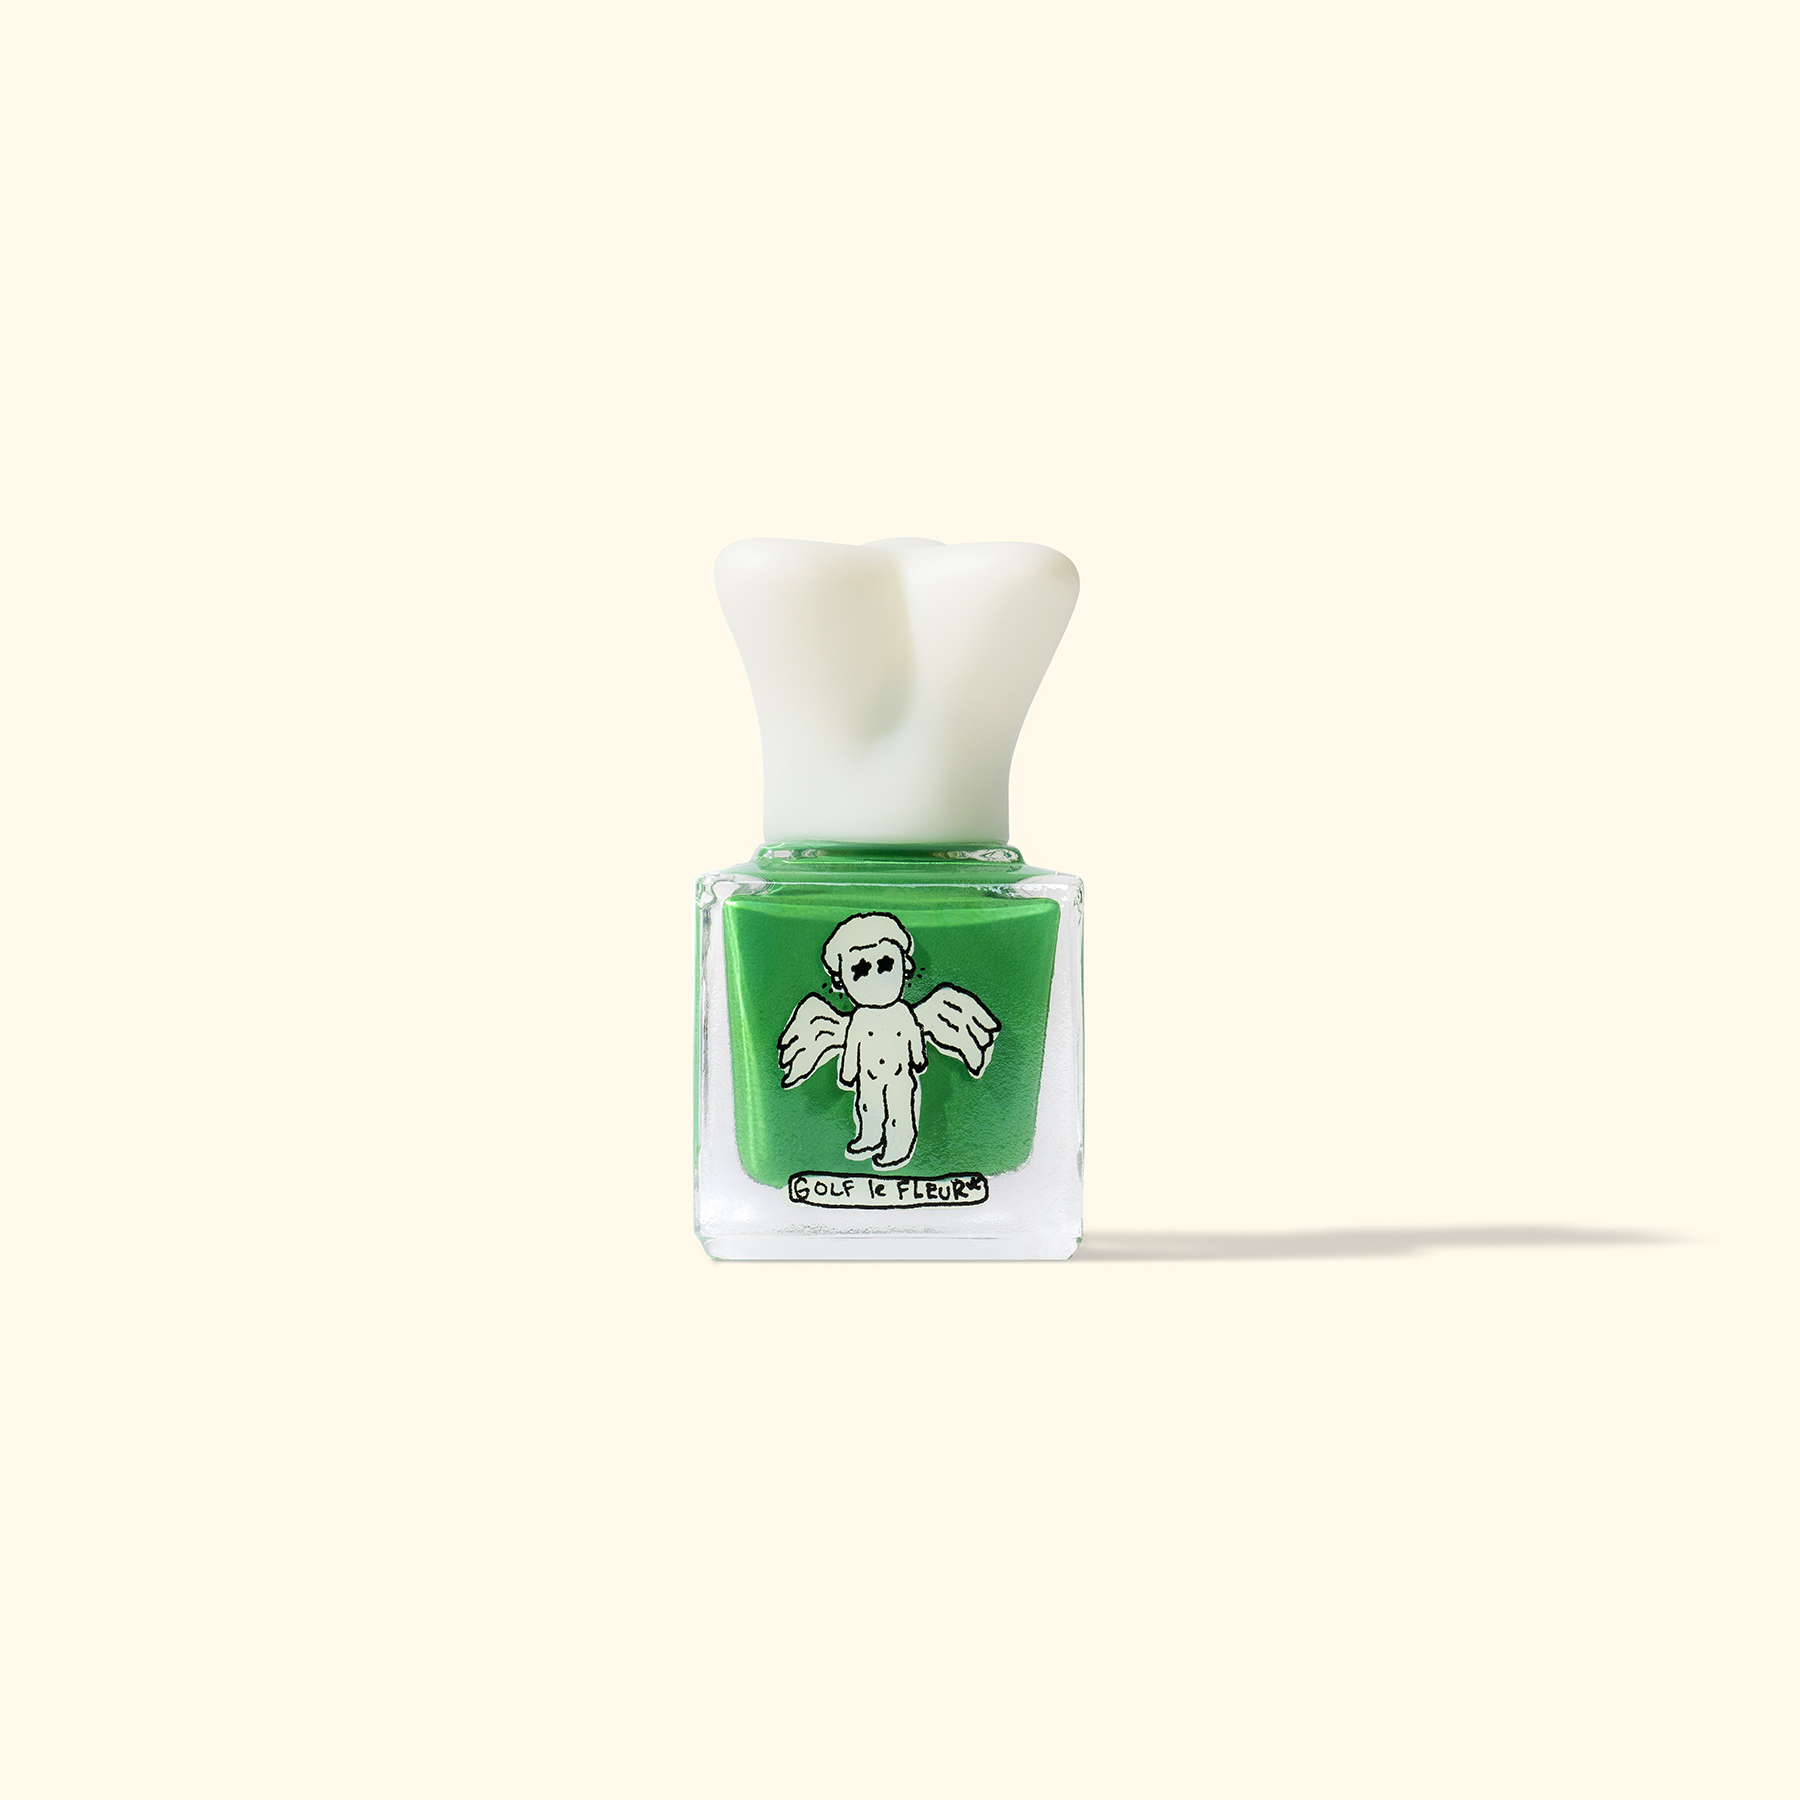 Bottle of green nail polish with a skull design on the label, against a plain background